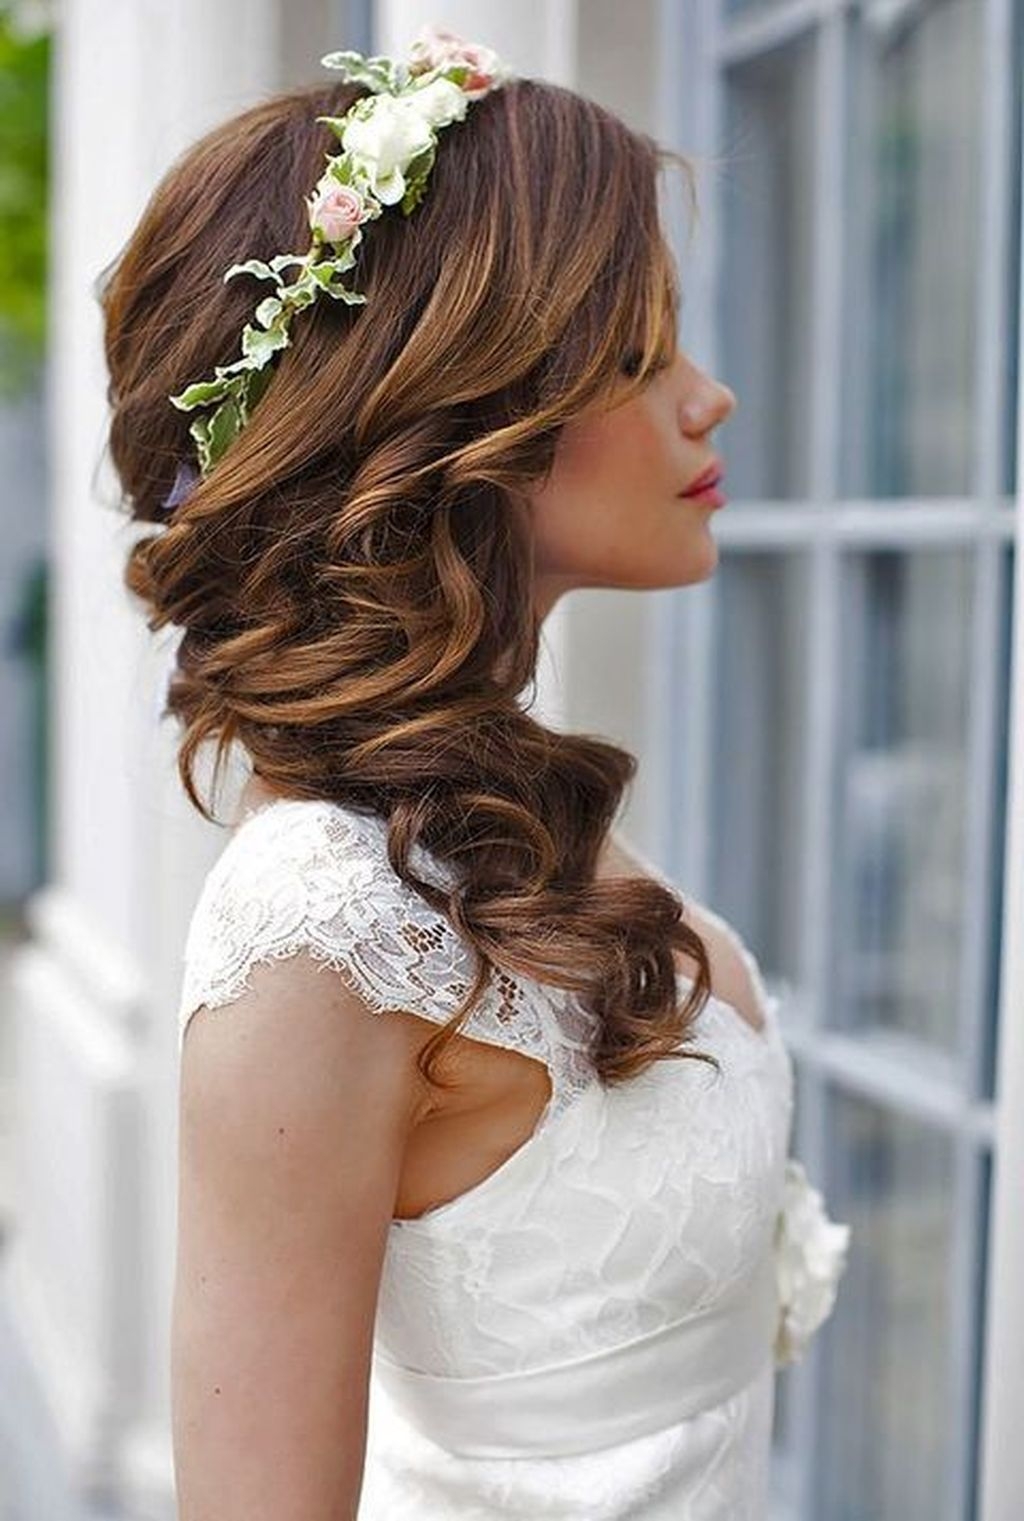 Elegant Wedding Hairstyle Ideas For Brides To Try